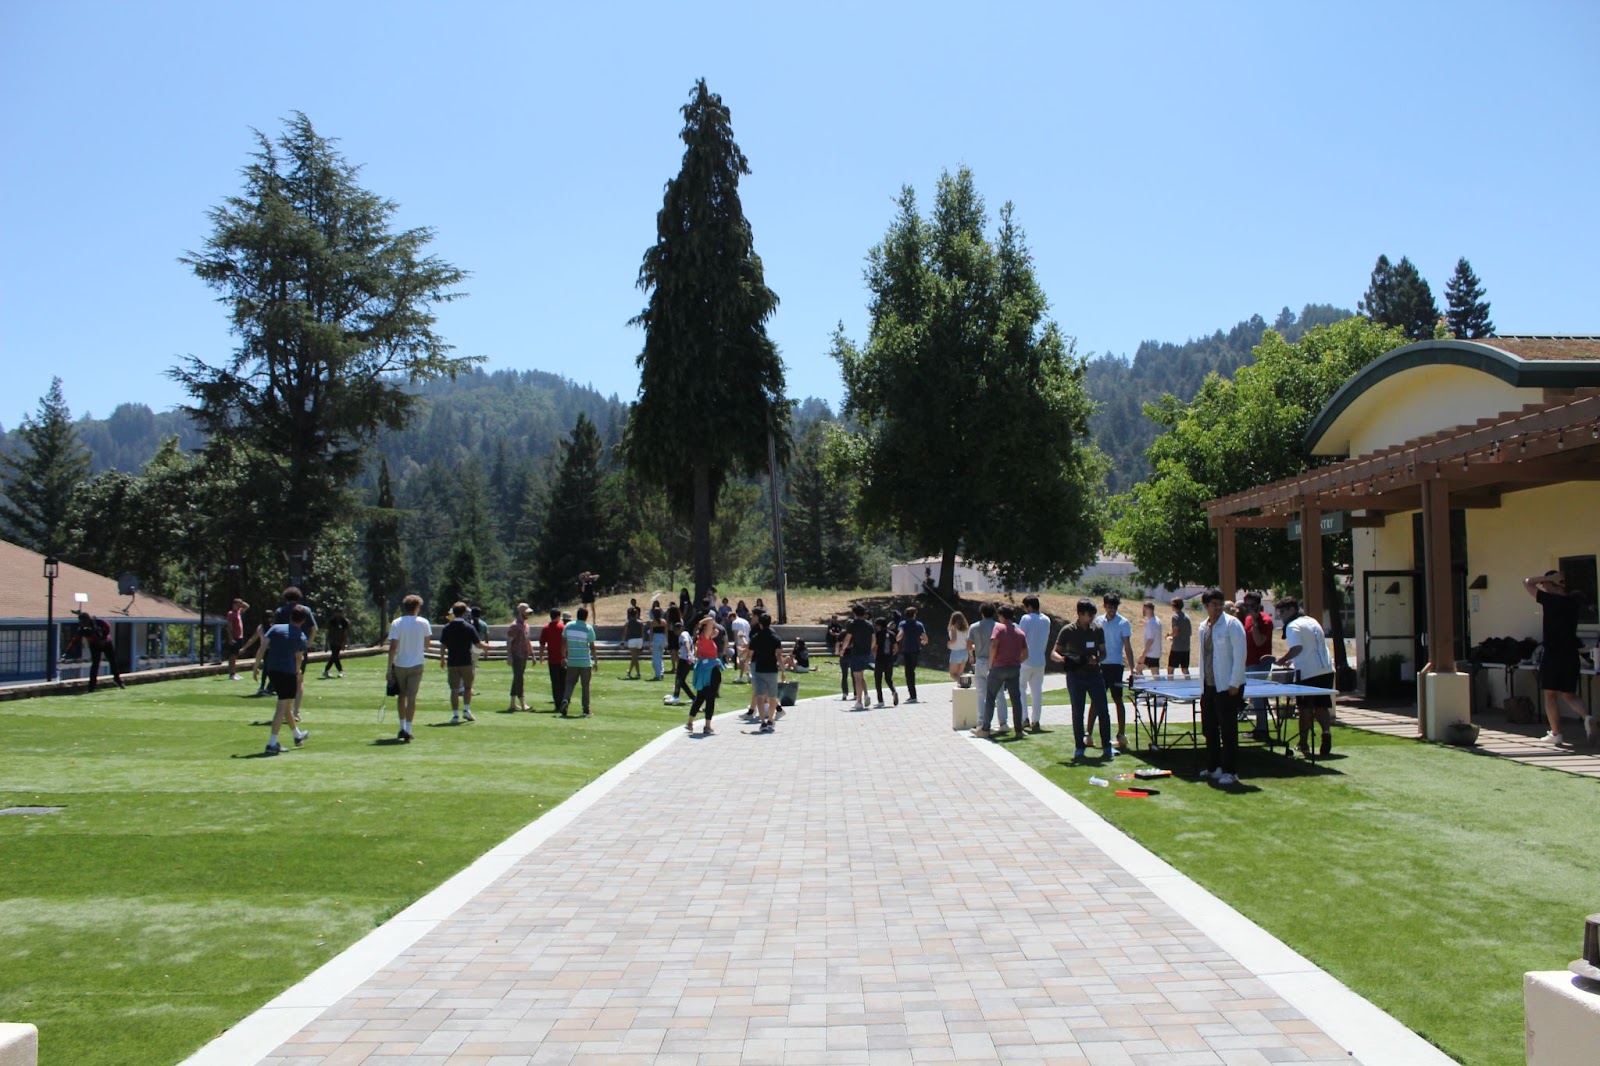 A lot of residents are gathered outside on the lawn at the retreat. They are exploring the area or engaging in some recreational activity.